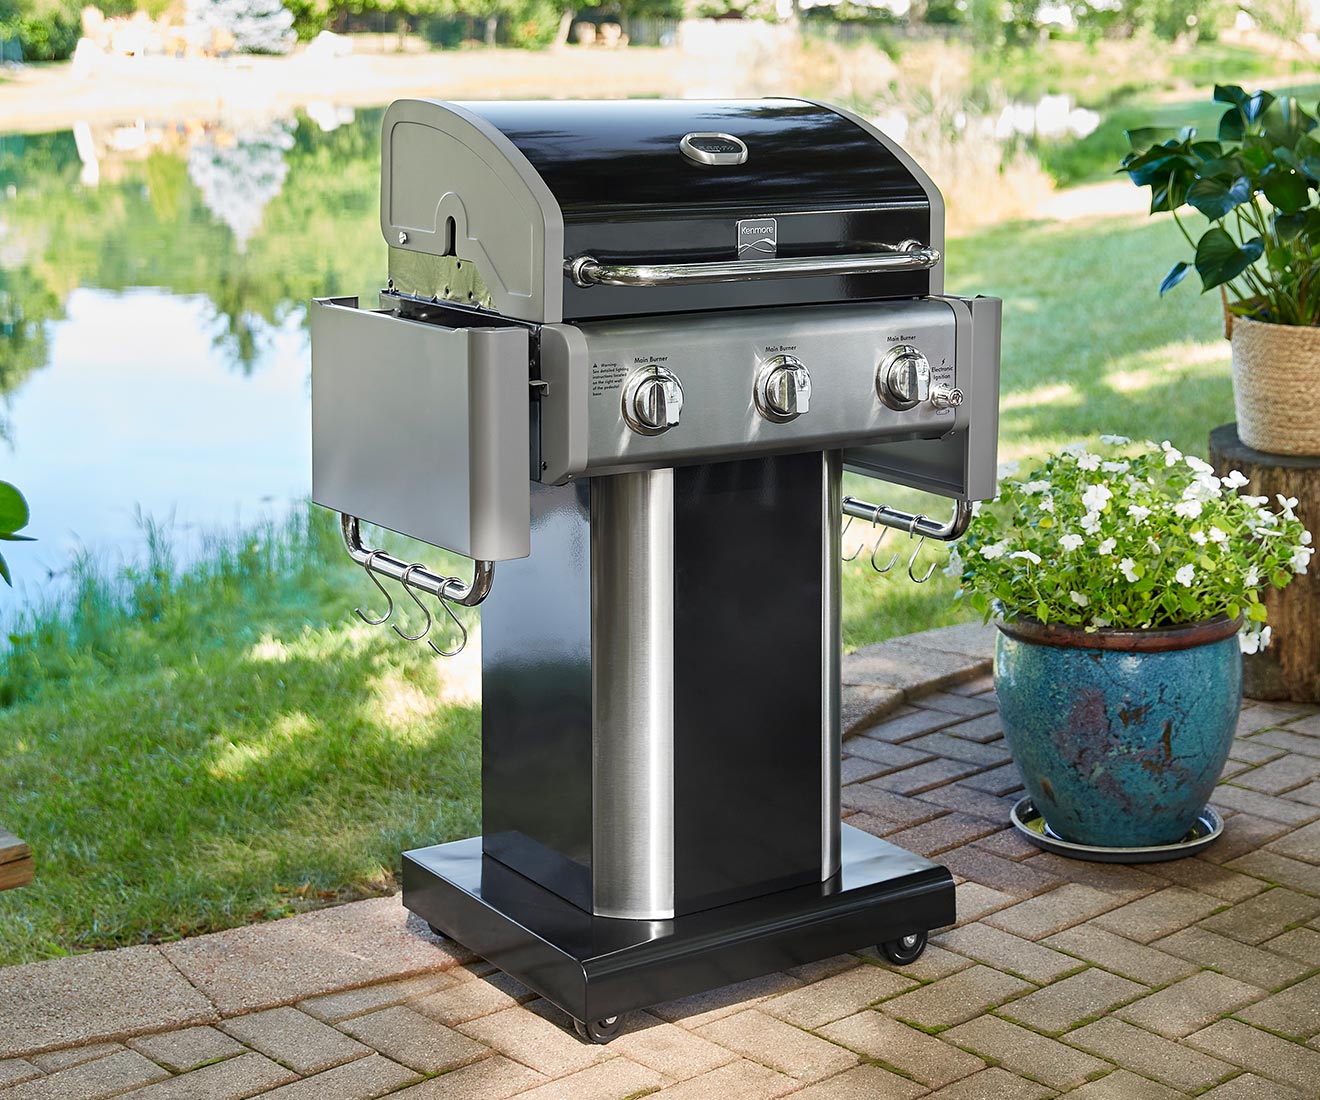 Kenmore 3-Burner Gas Grill in Black Pedestal Style PG-4030400LD with Foldable Side Shelves for Easy Compact Storage